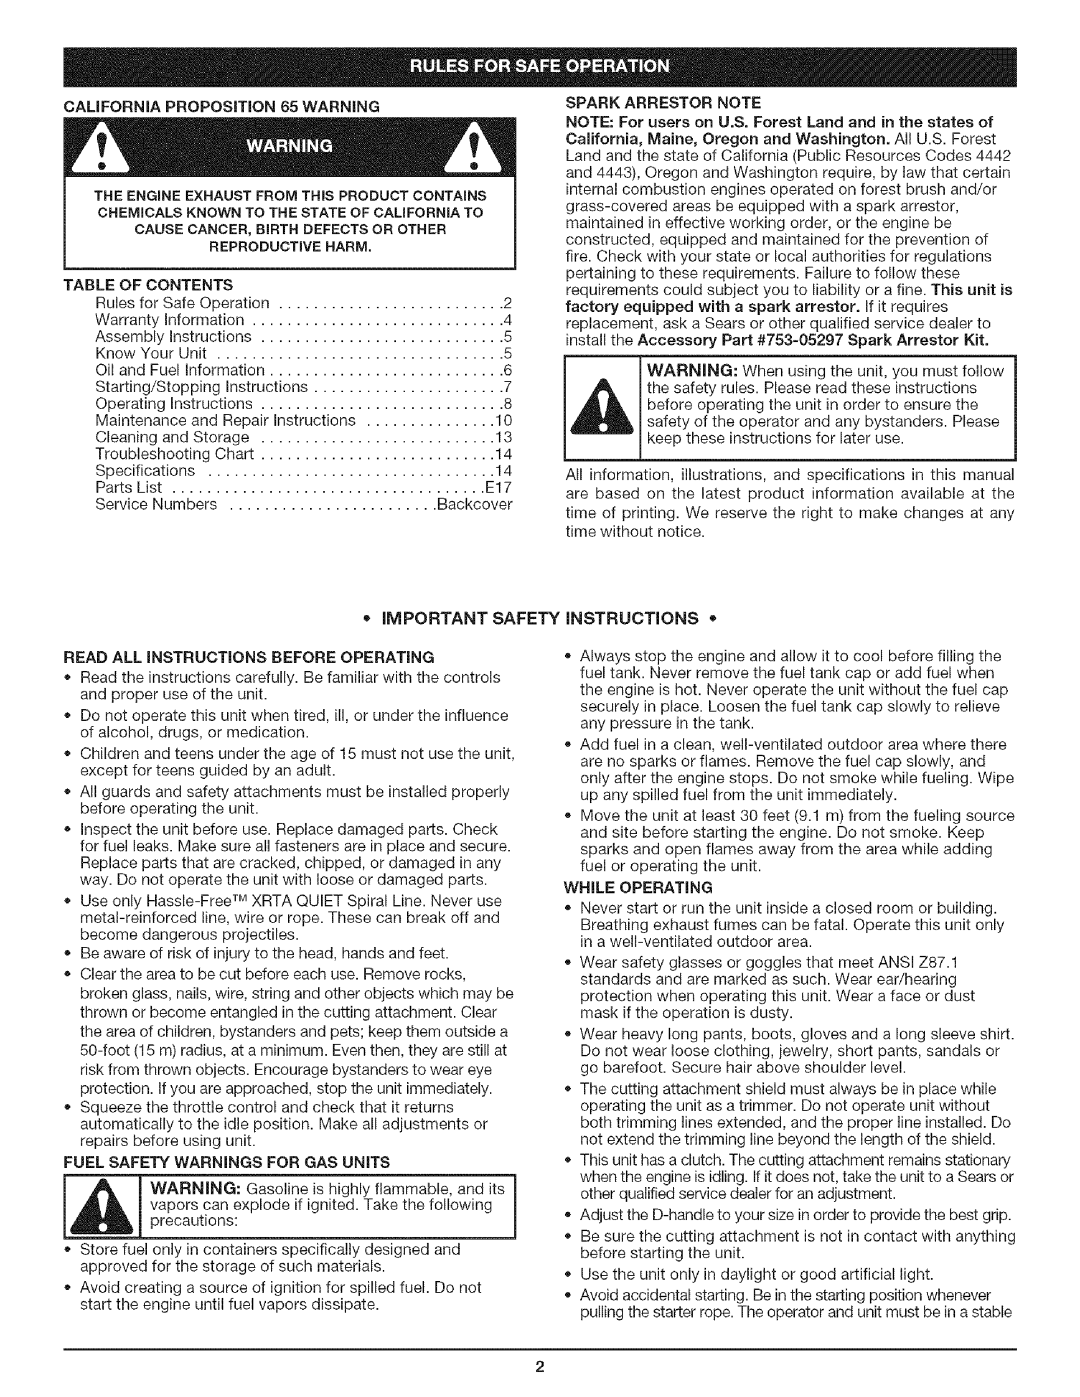 Craftsman 316.79197 manual iMPORTANT SAFETY, Instructions 